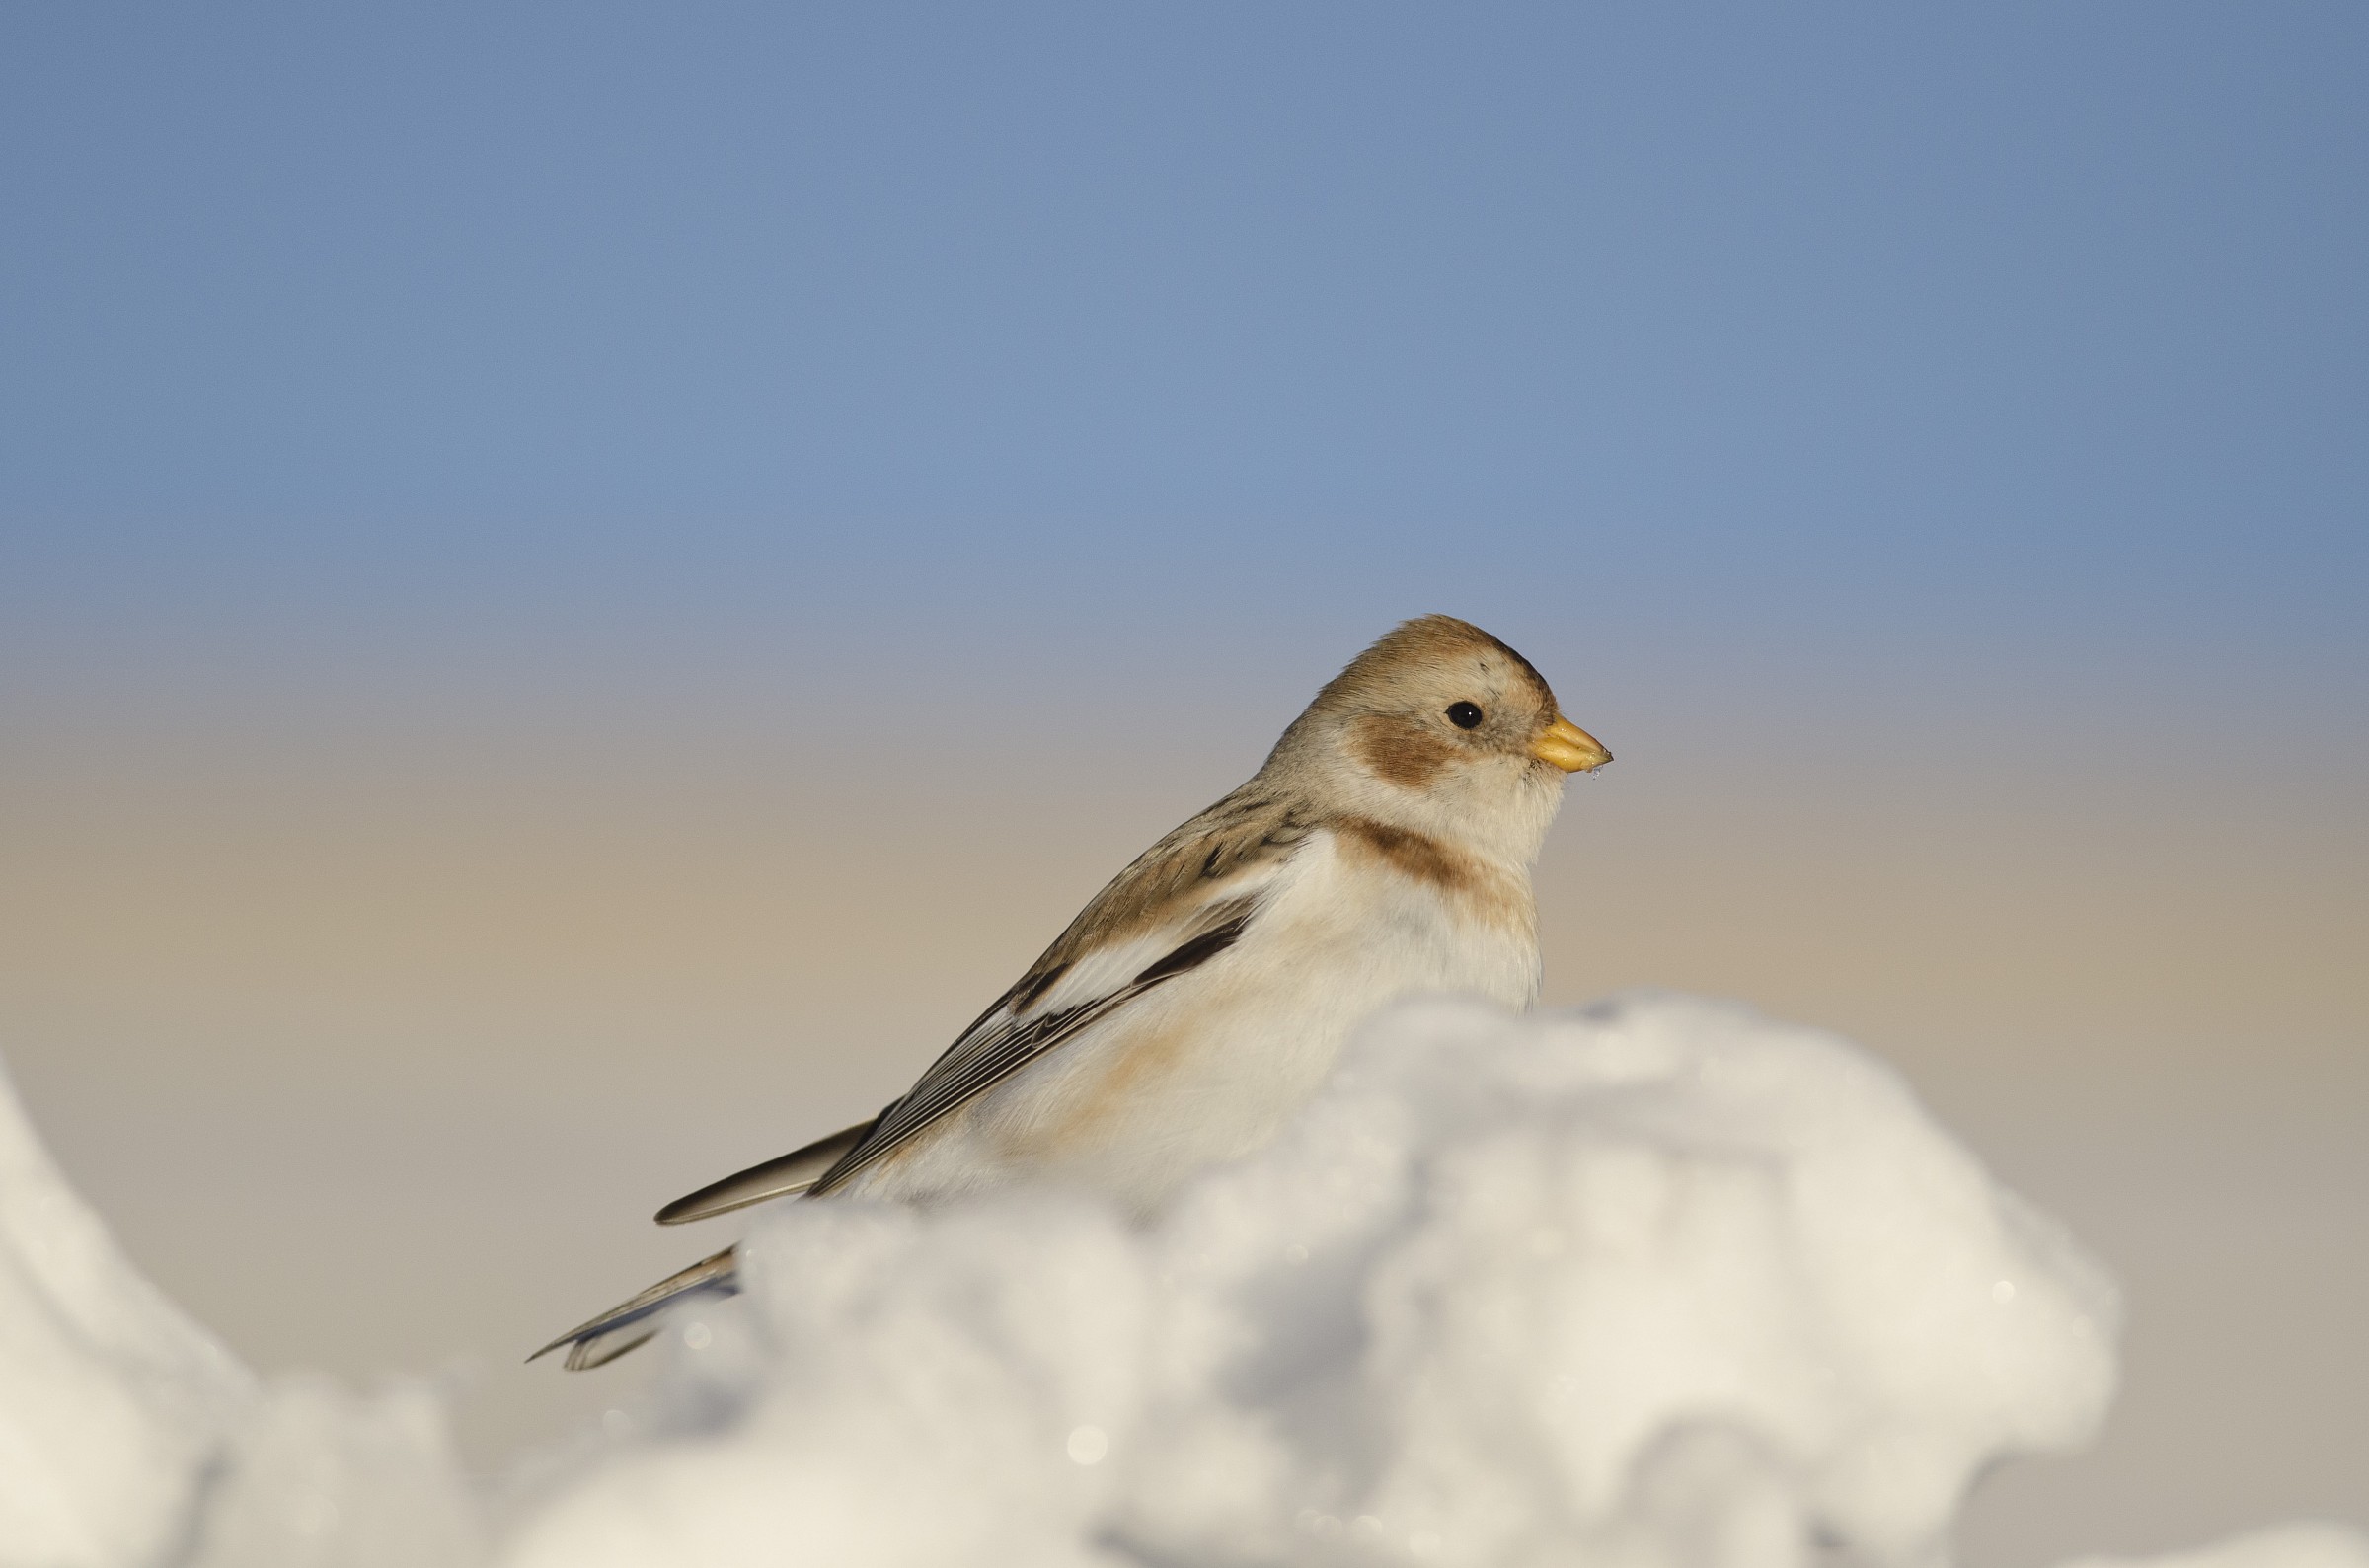 Behind the snow bunting...